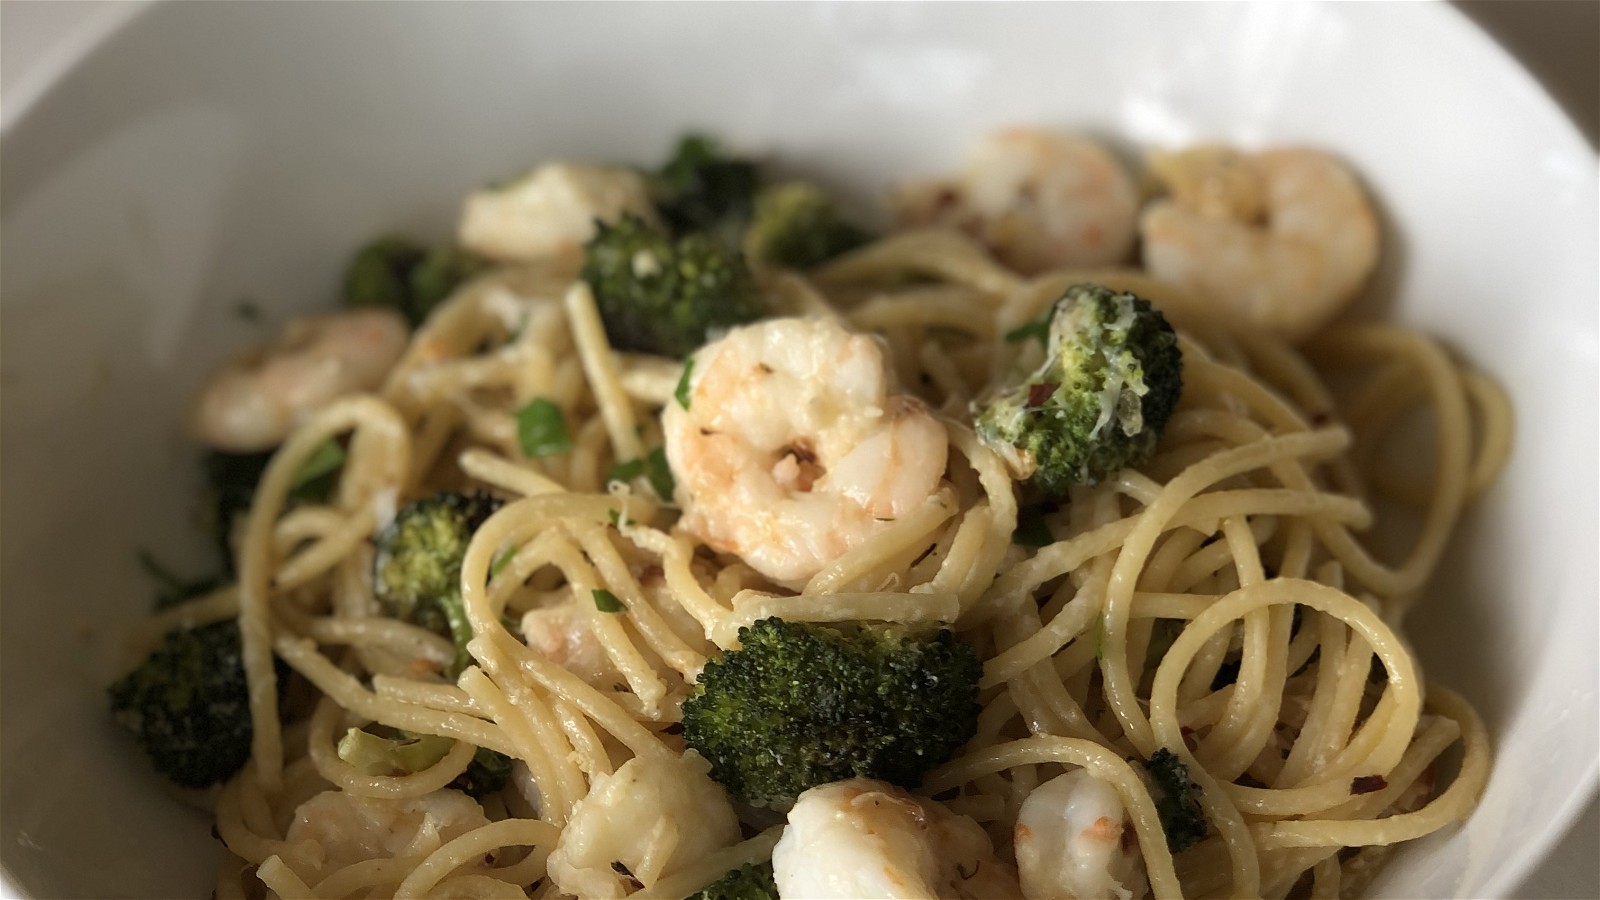 Image of Shrimp and Broccoli with Pasta